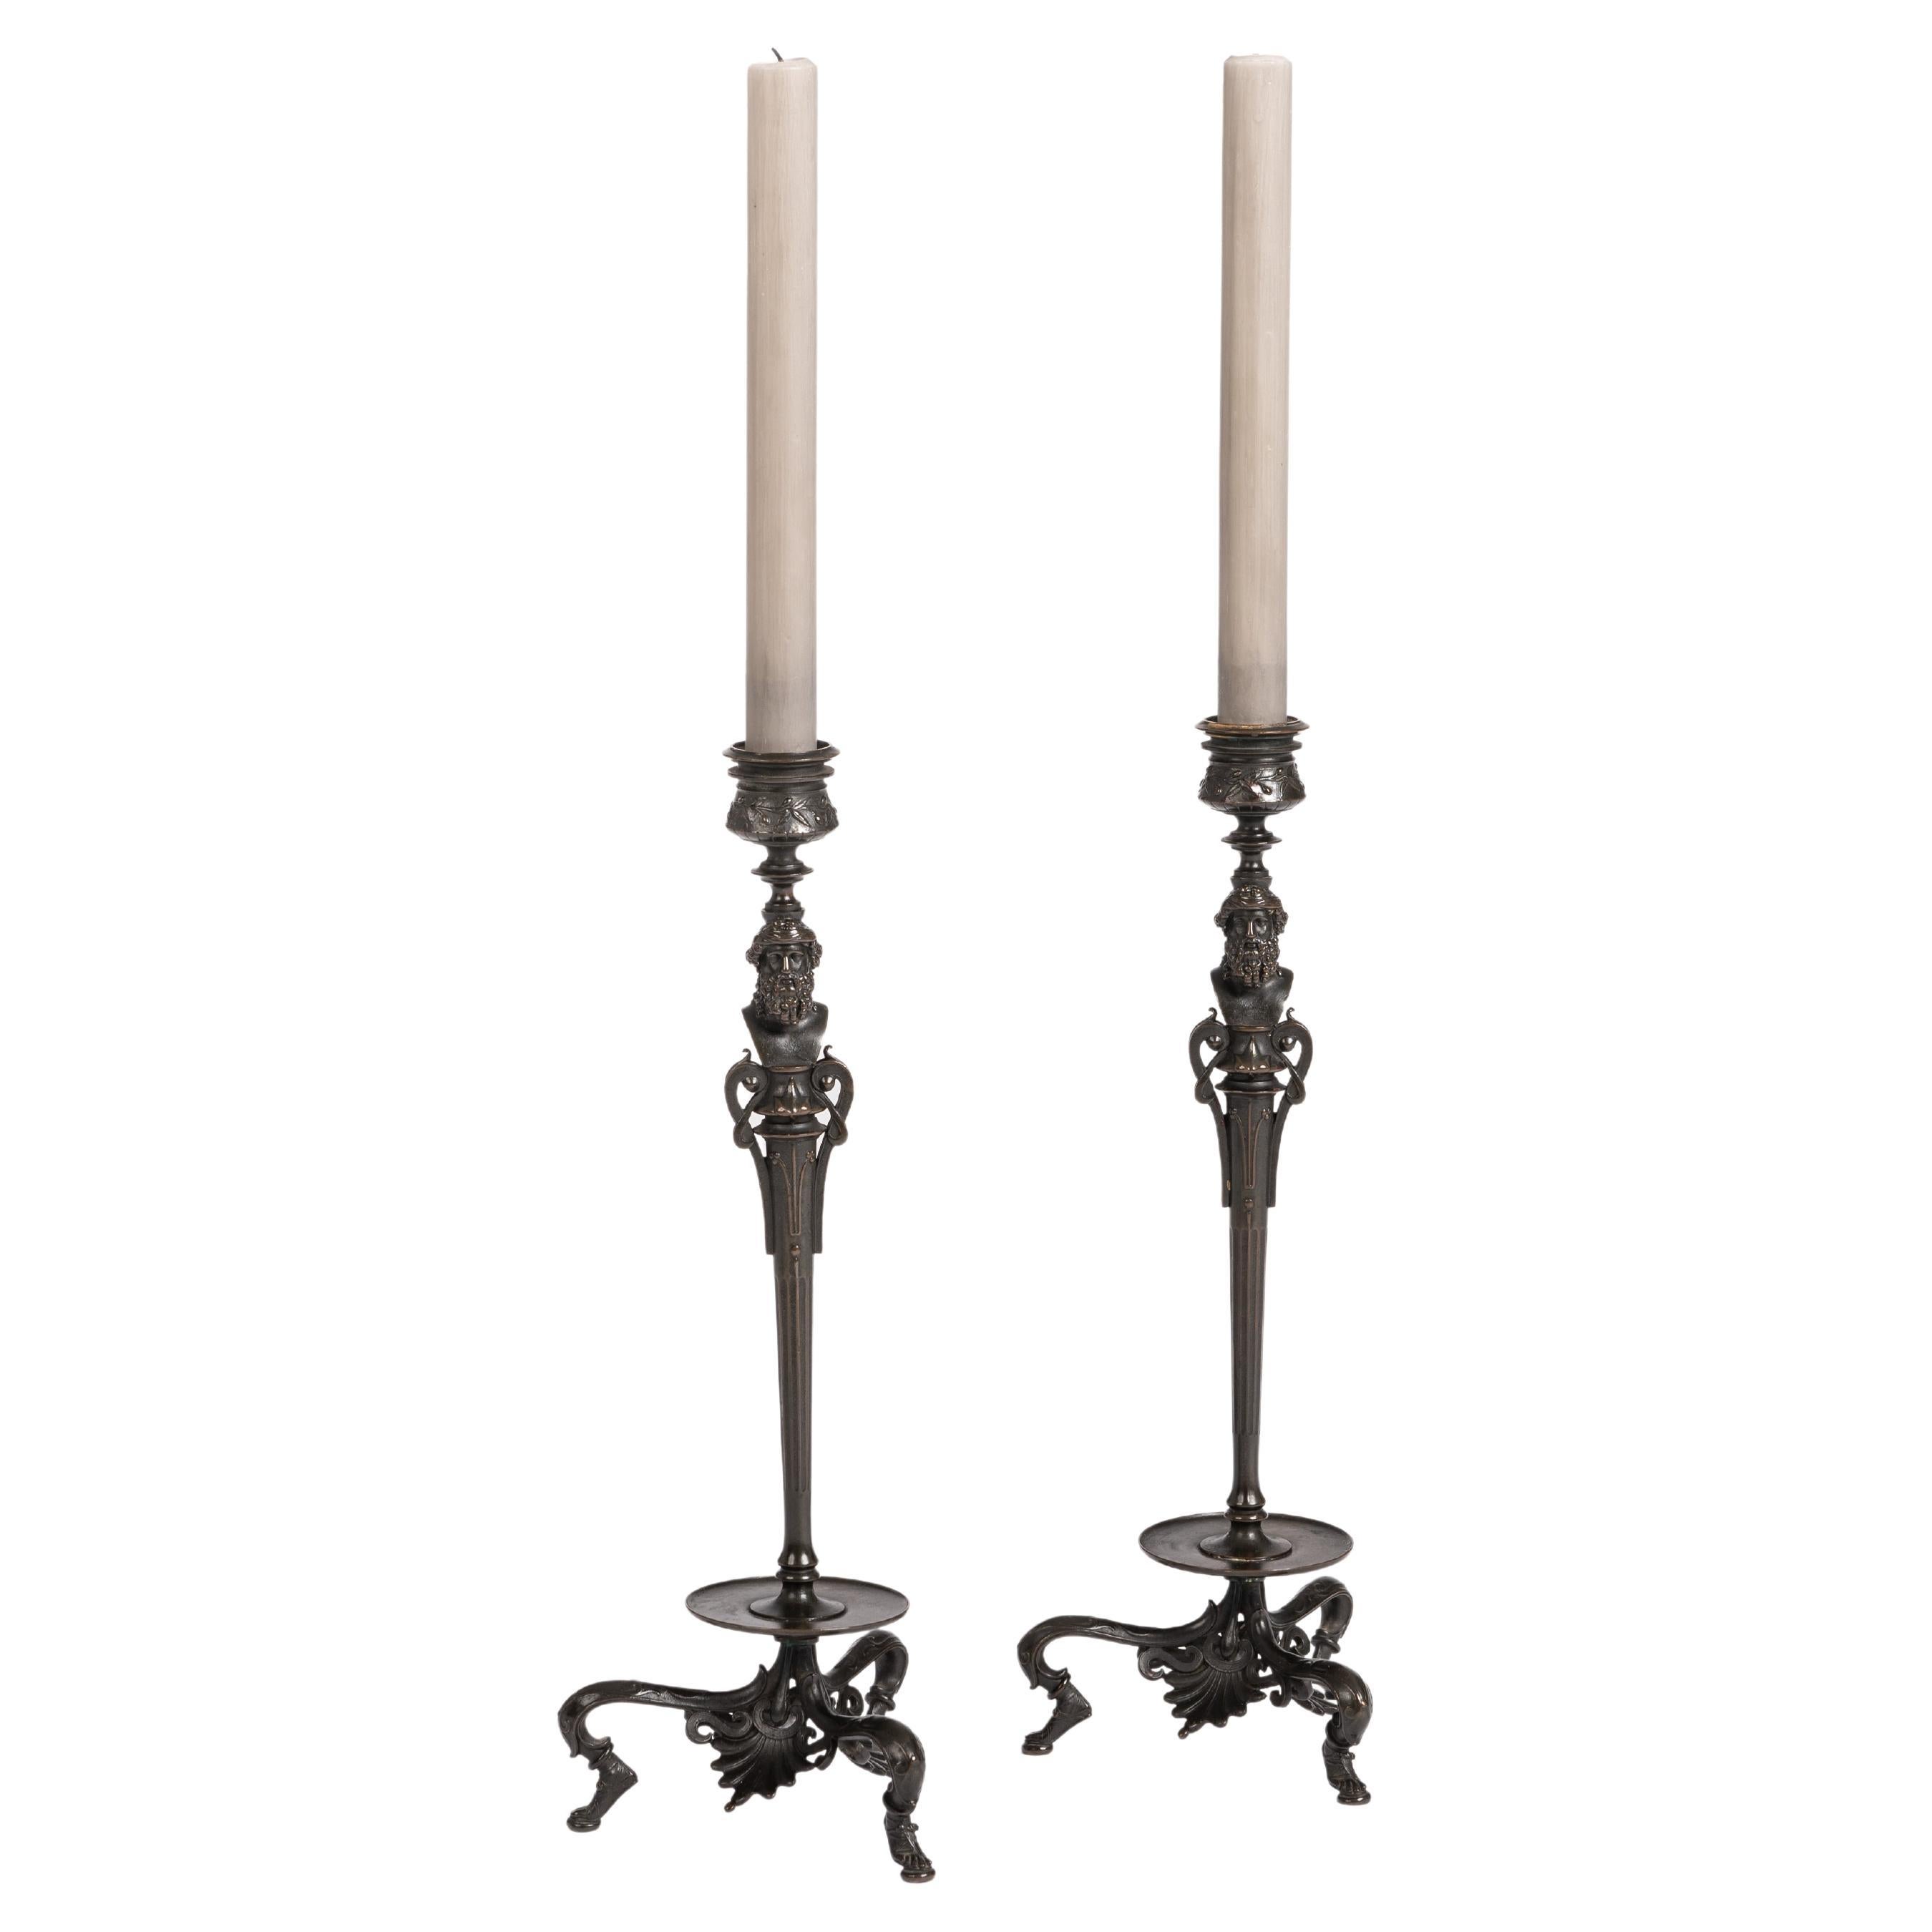 Pair of French Napoleon III Bronze Candlesticks by Foundry F. Barbedienne 1860s For Sale